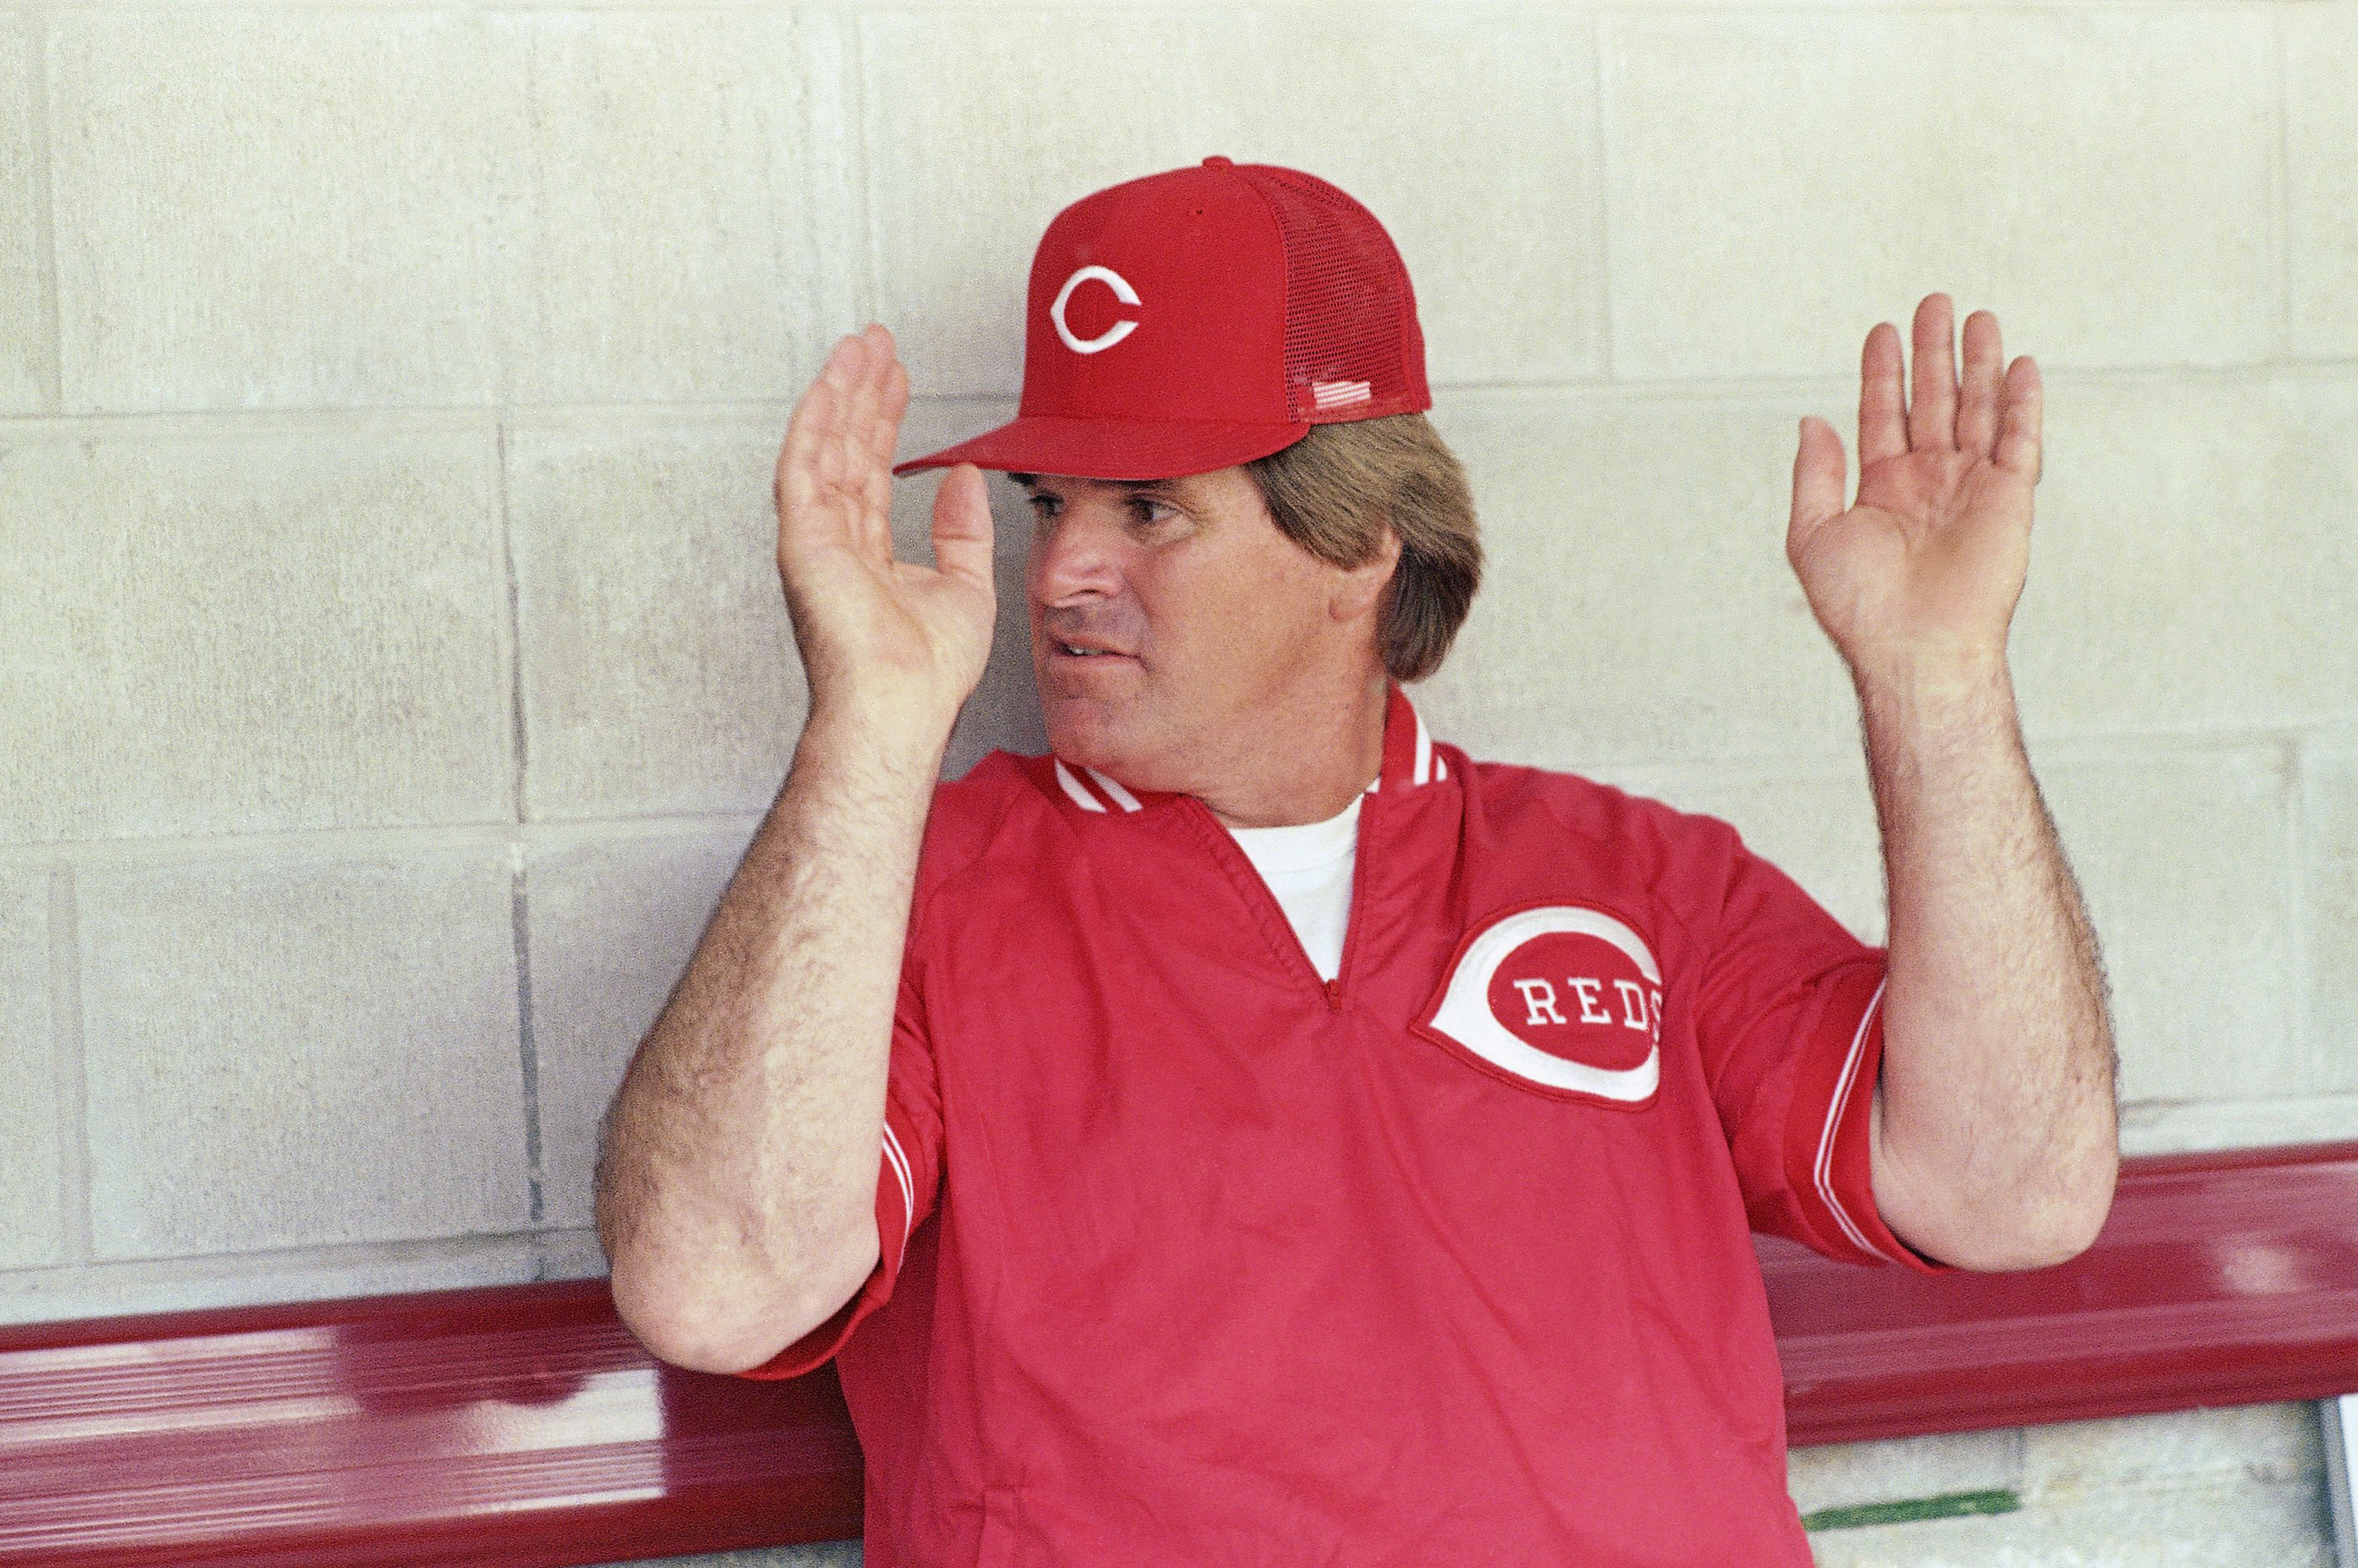 30 years later: My role in the Pete Rose saga